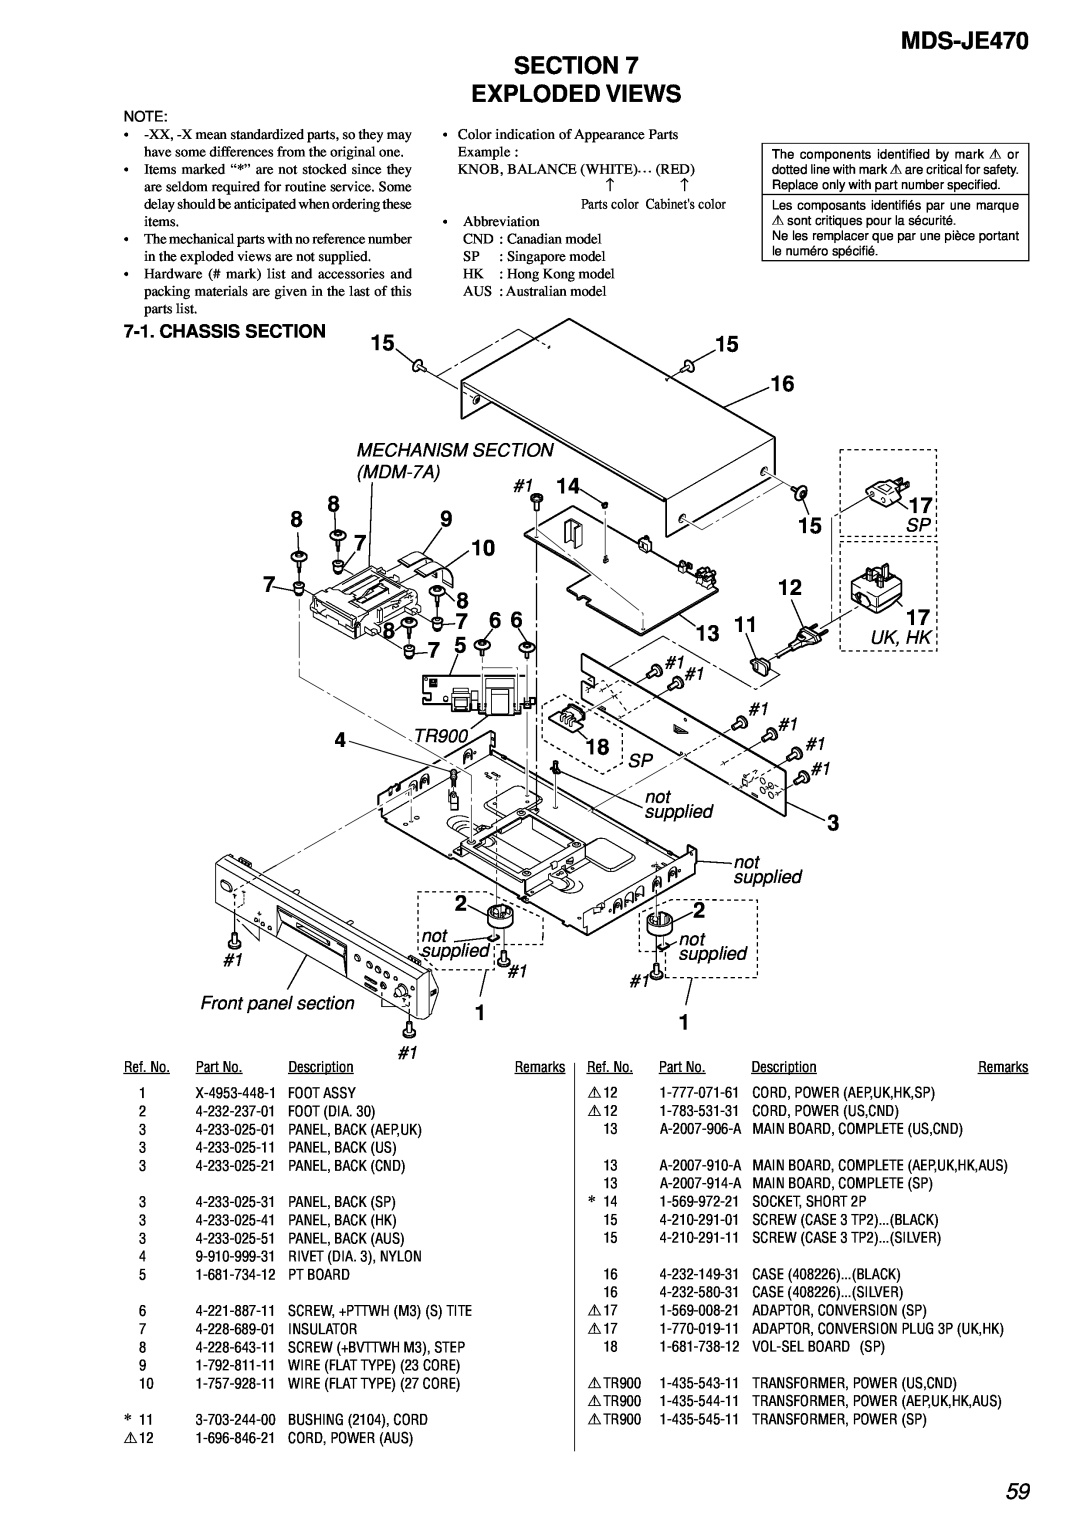 Sony MDS-S50 specifications Section Exploded Views, Chassis Section, MDS-JE470 